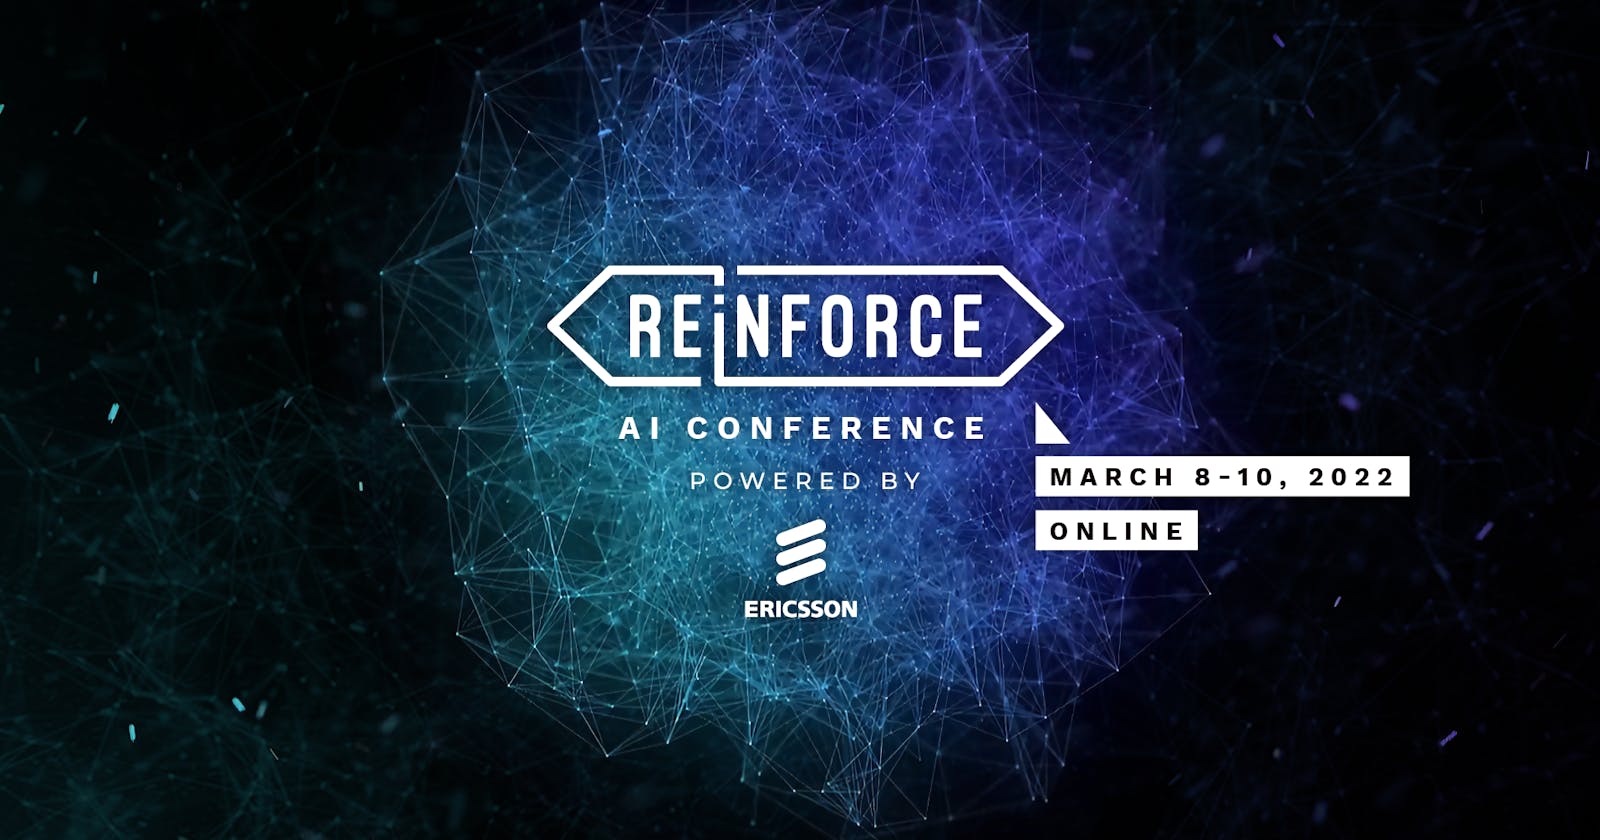 Reinforce AI Conference 2022 Starts Tomorrow